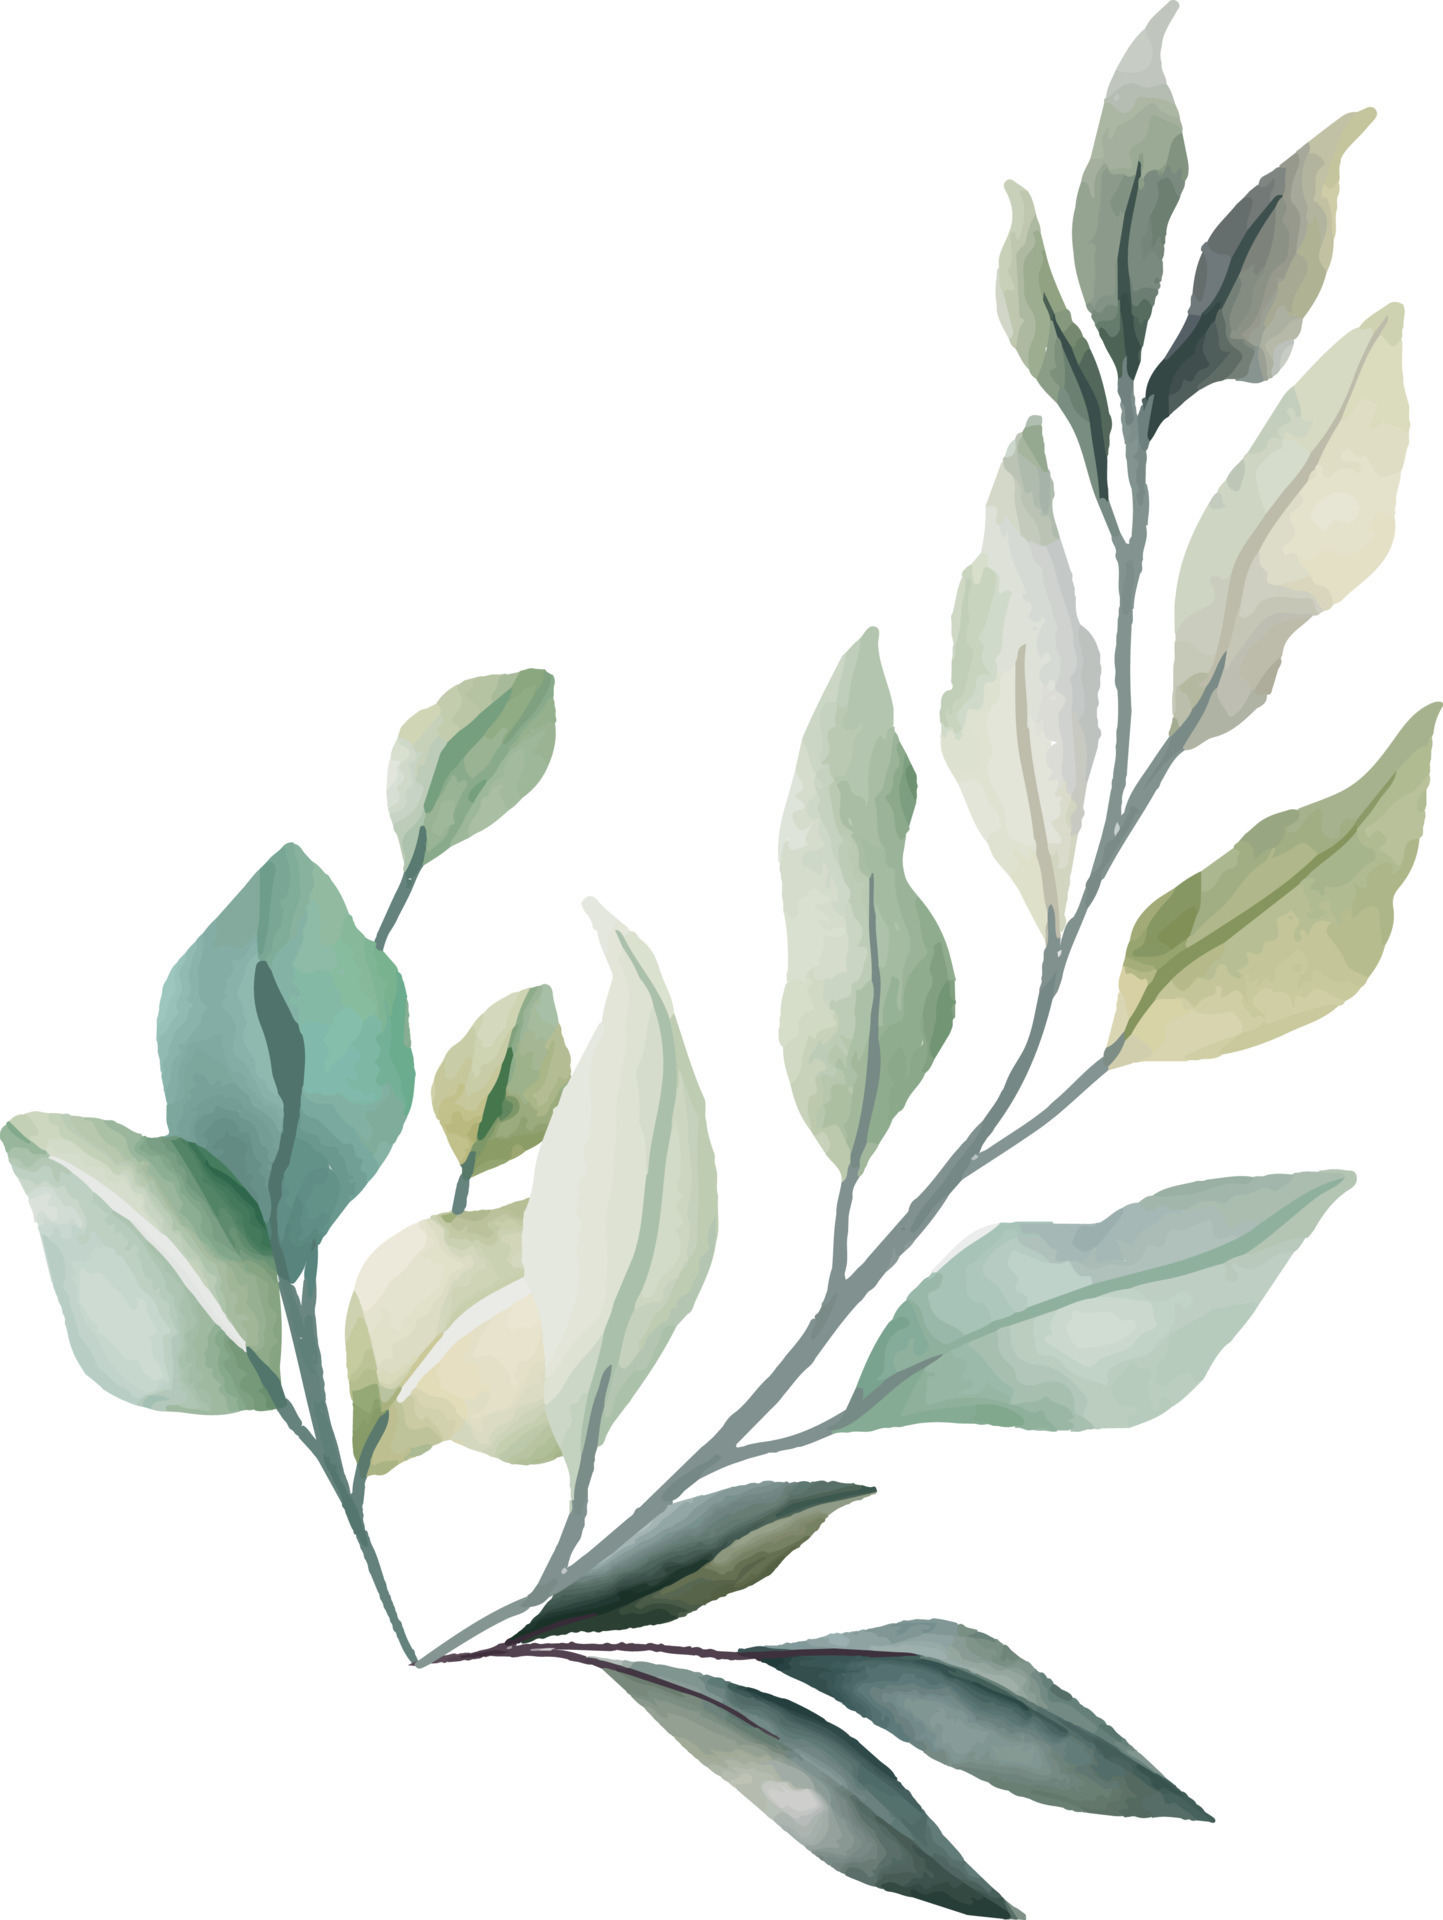 Leaves, flowers in watercolor for decoration. Lime green and gray color ...